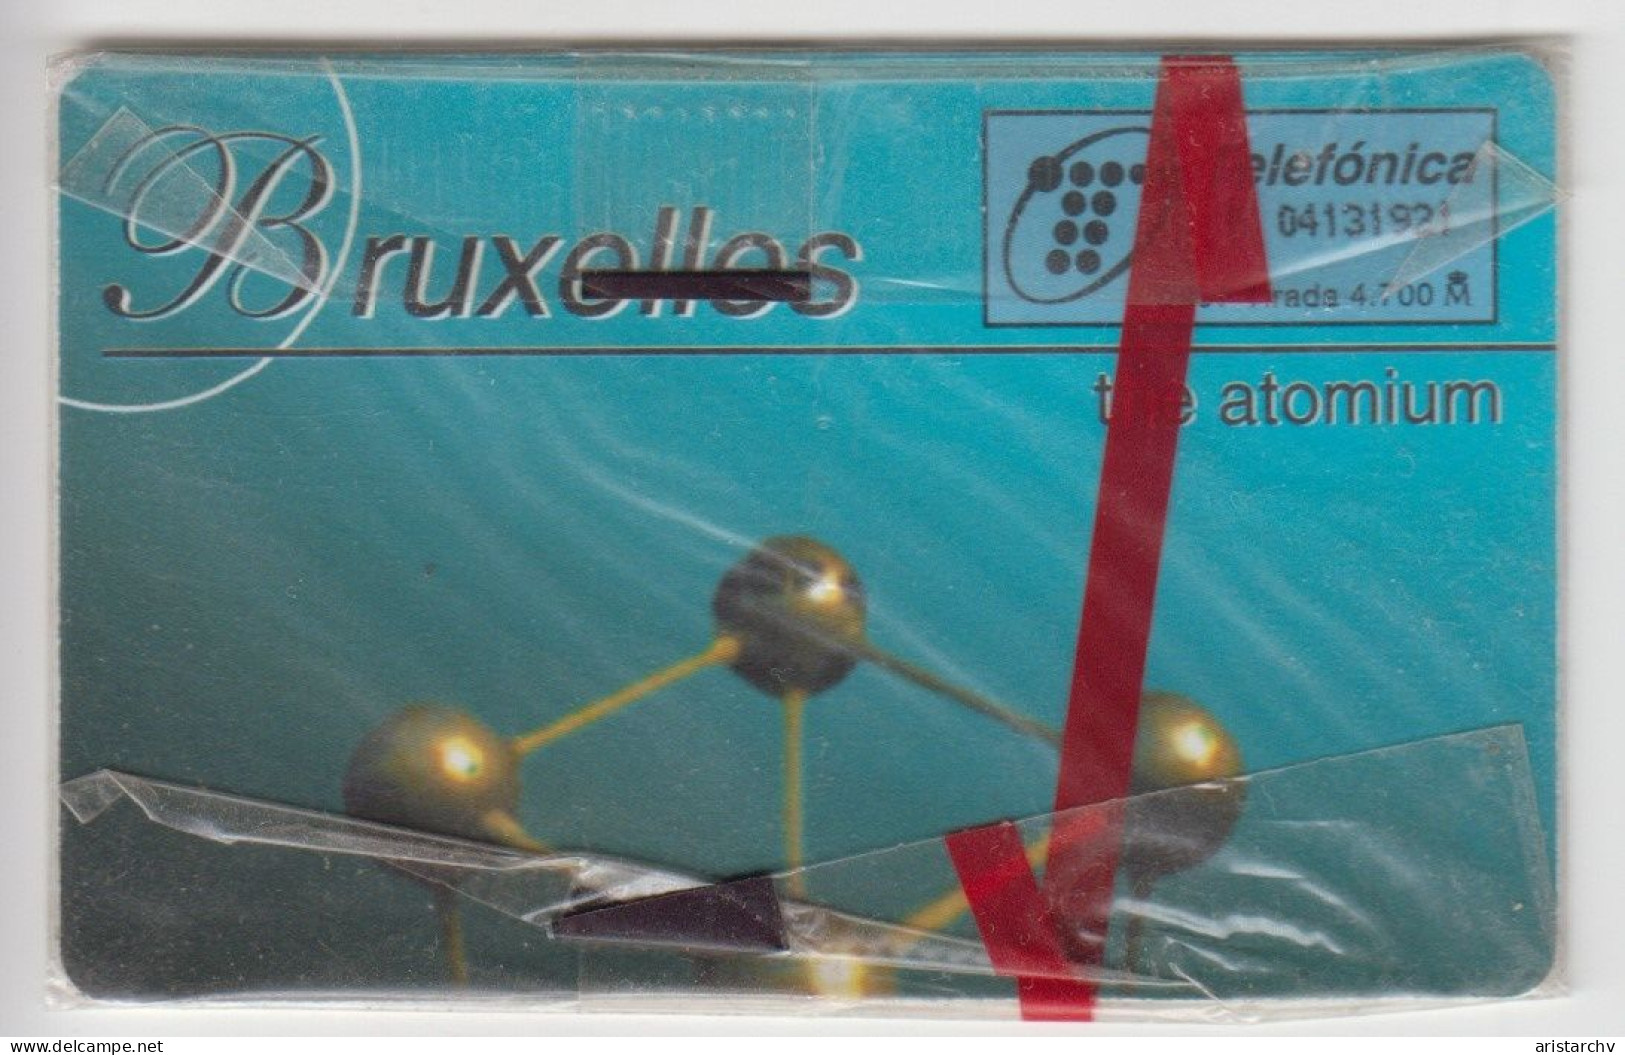 SPAIN 1997 CARD COLLECT '98 THESSALONIKI GREECE BRUXELLES ATOMIUM MINT CARD IN BLISTER - Private Issues